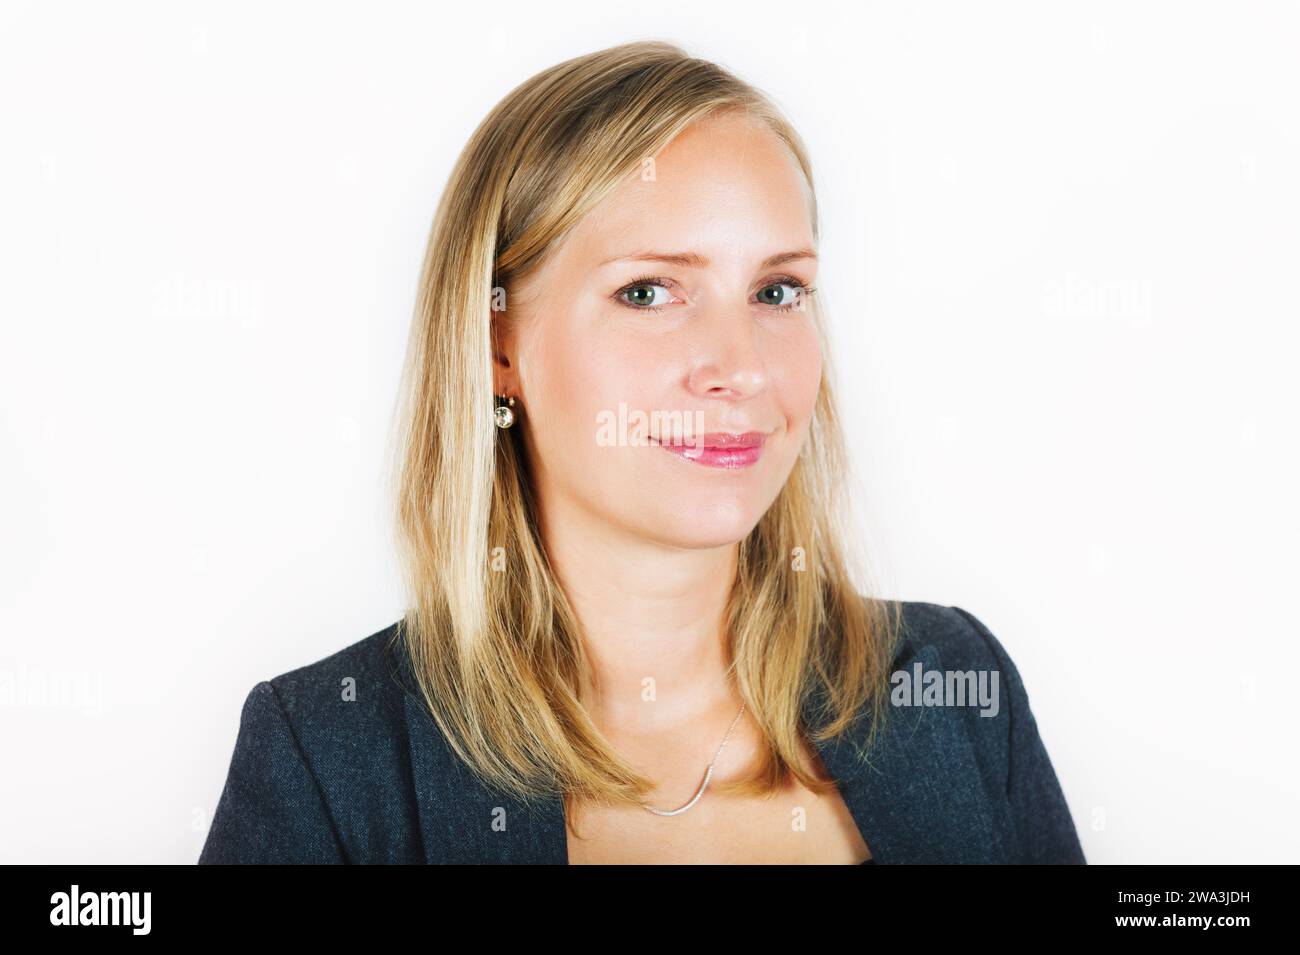 Close up portrait of 35 year old woman in formalwear Stock Photo